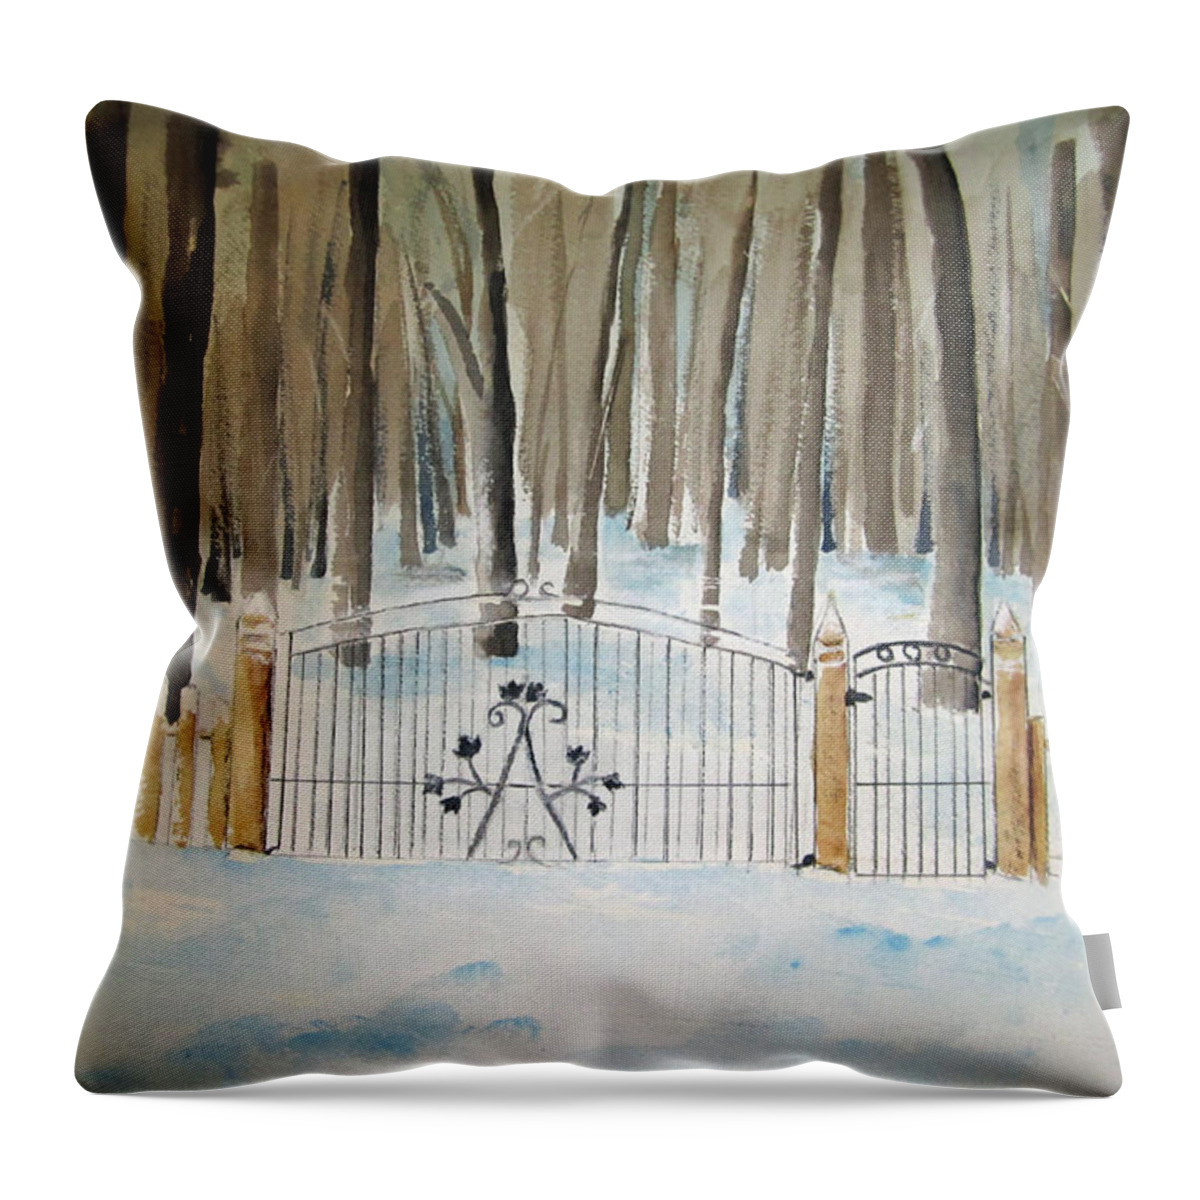 Winter Snow Throw Pillow featuring the painting Canada The Grove by Elvira Ingram